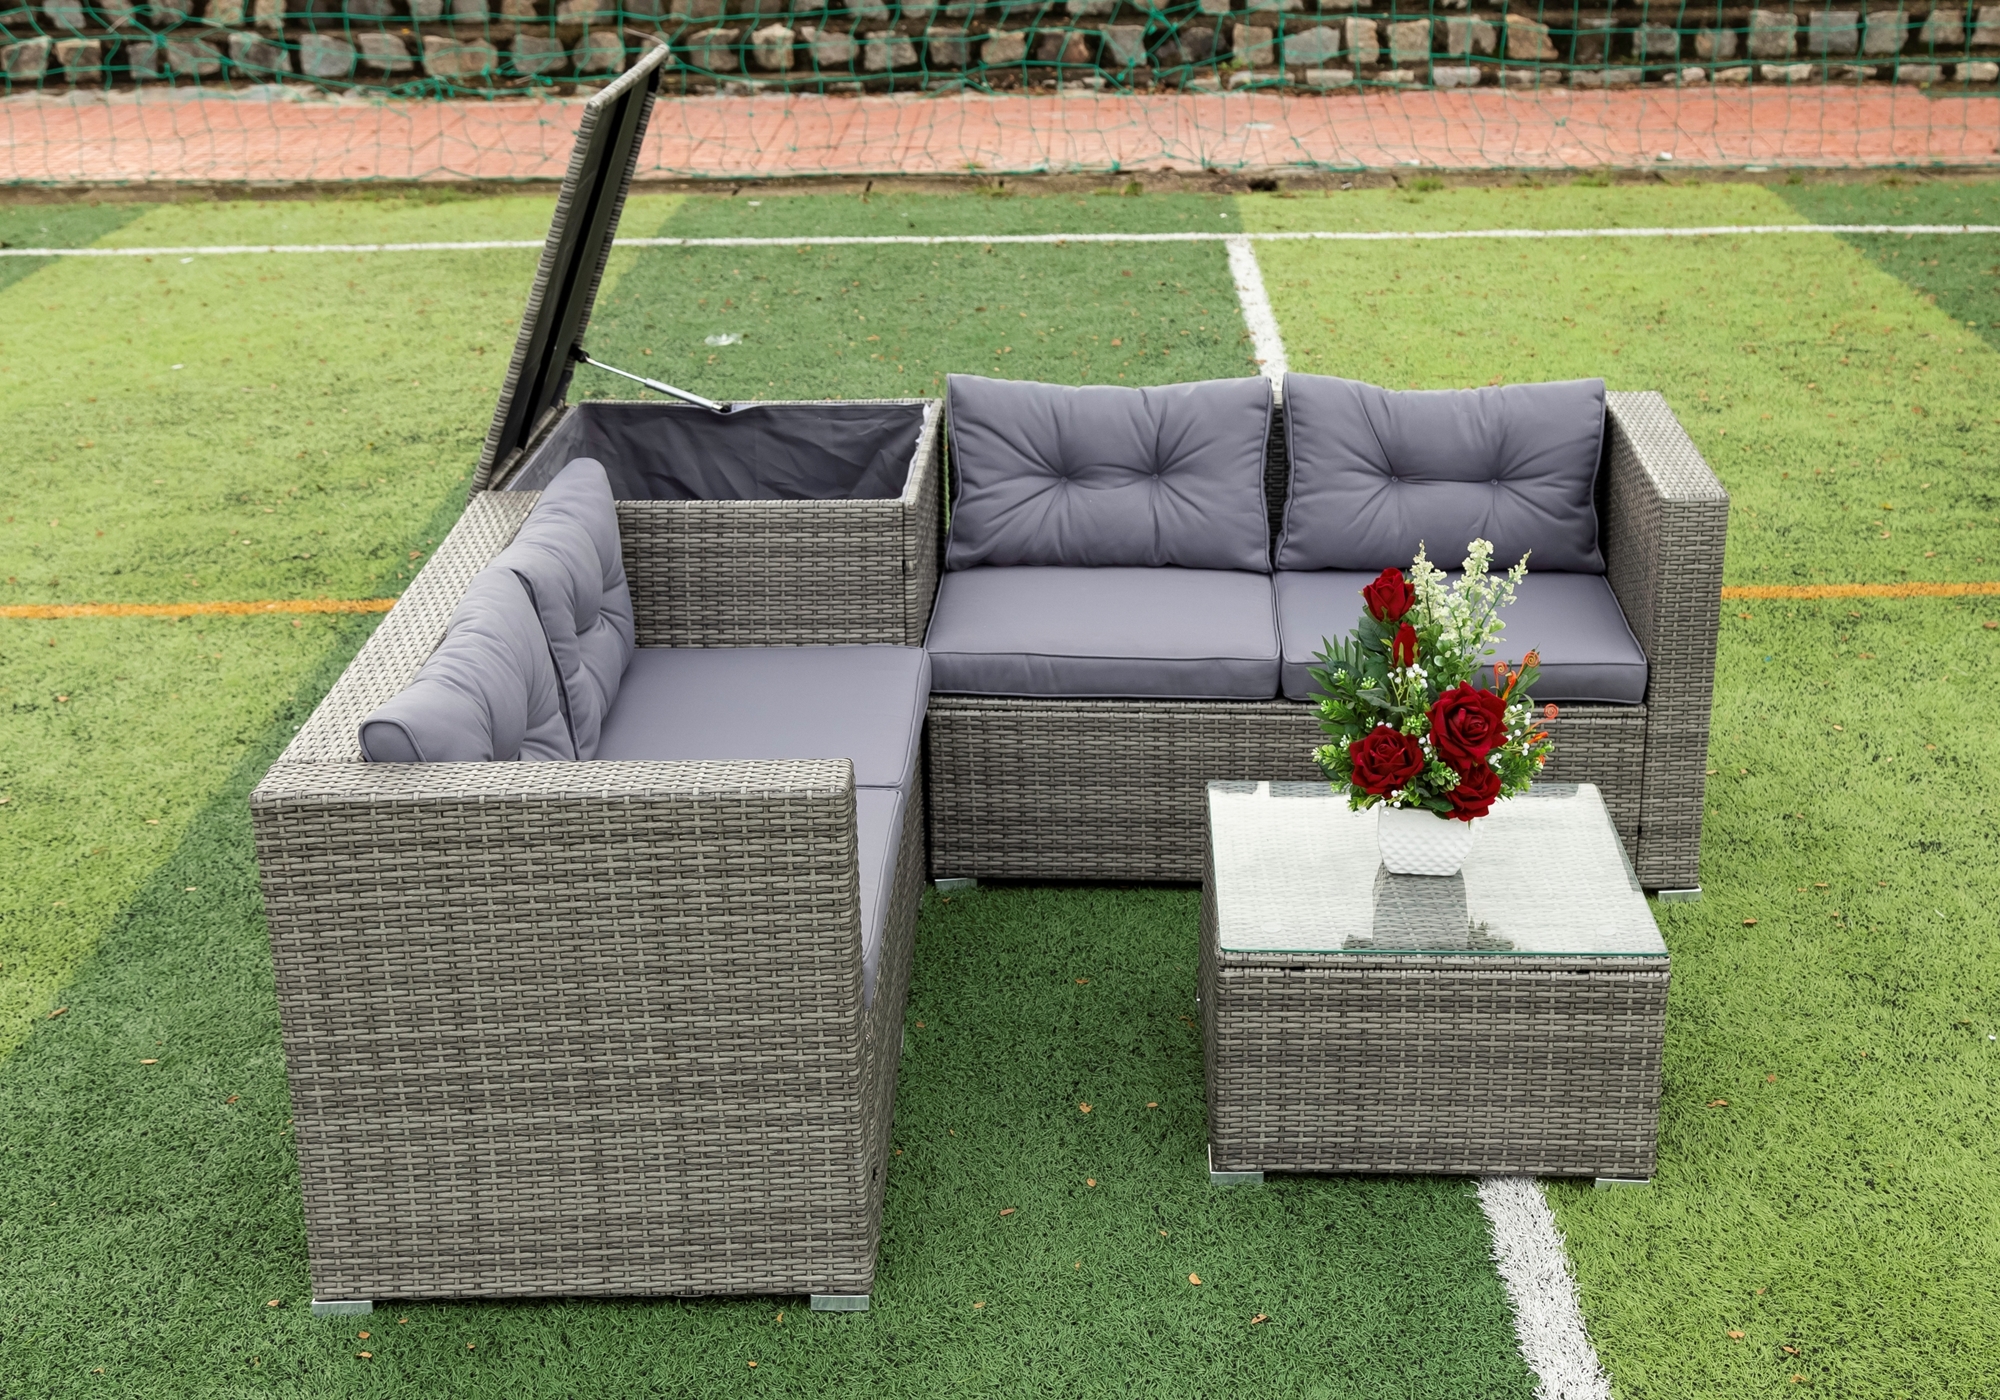 Patio Bistro Dining Chair Furniture Sets, 4 Pieces Patio Furniture Sets with Glass Coffee Table & Storage Box, Leisure Chair Conversation Set with Soft Cushion for Garden Poolside, Grey, SS2174 - image 4 of 9